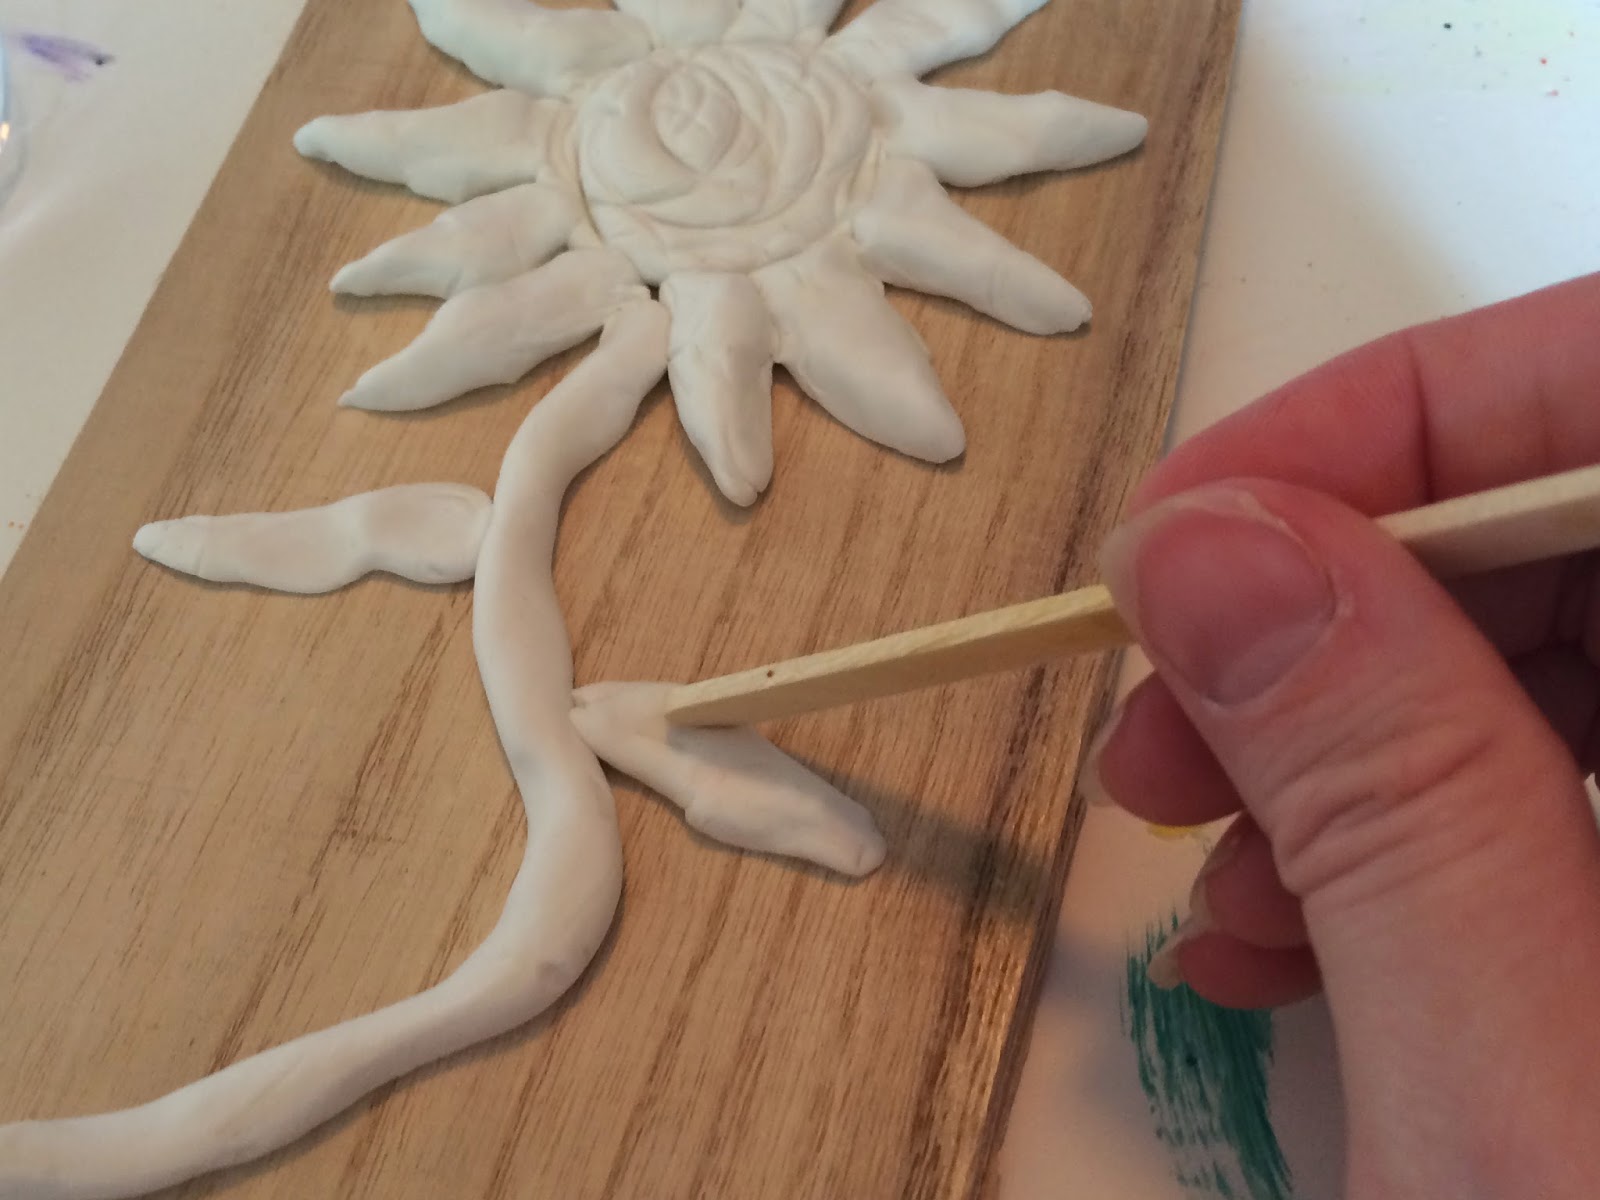 Mini Monets and Mommies: Kids' Stamper Art: Model Magic and Paint 